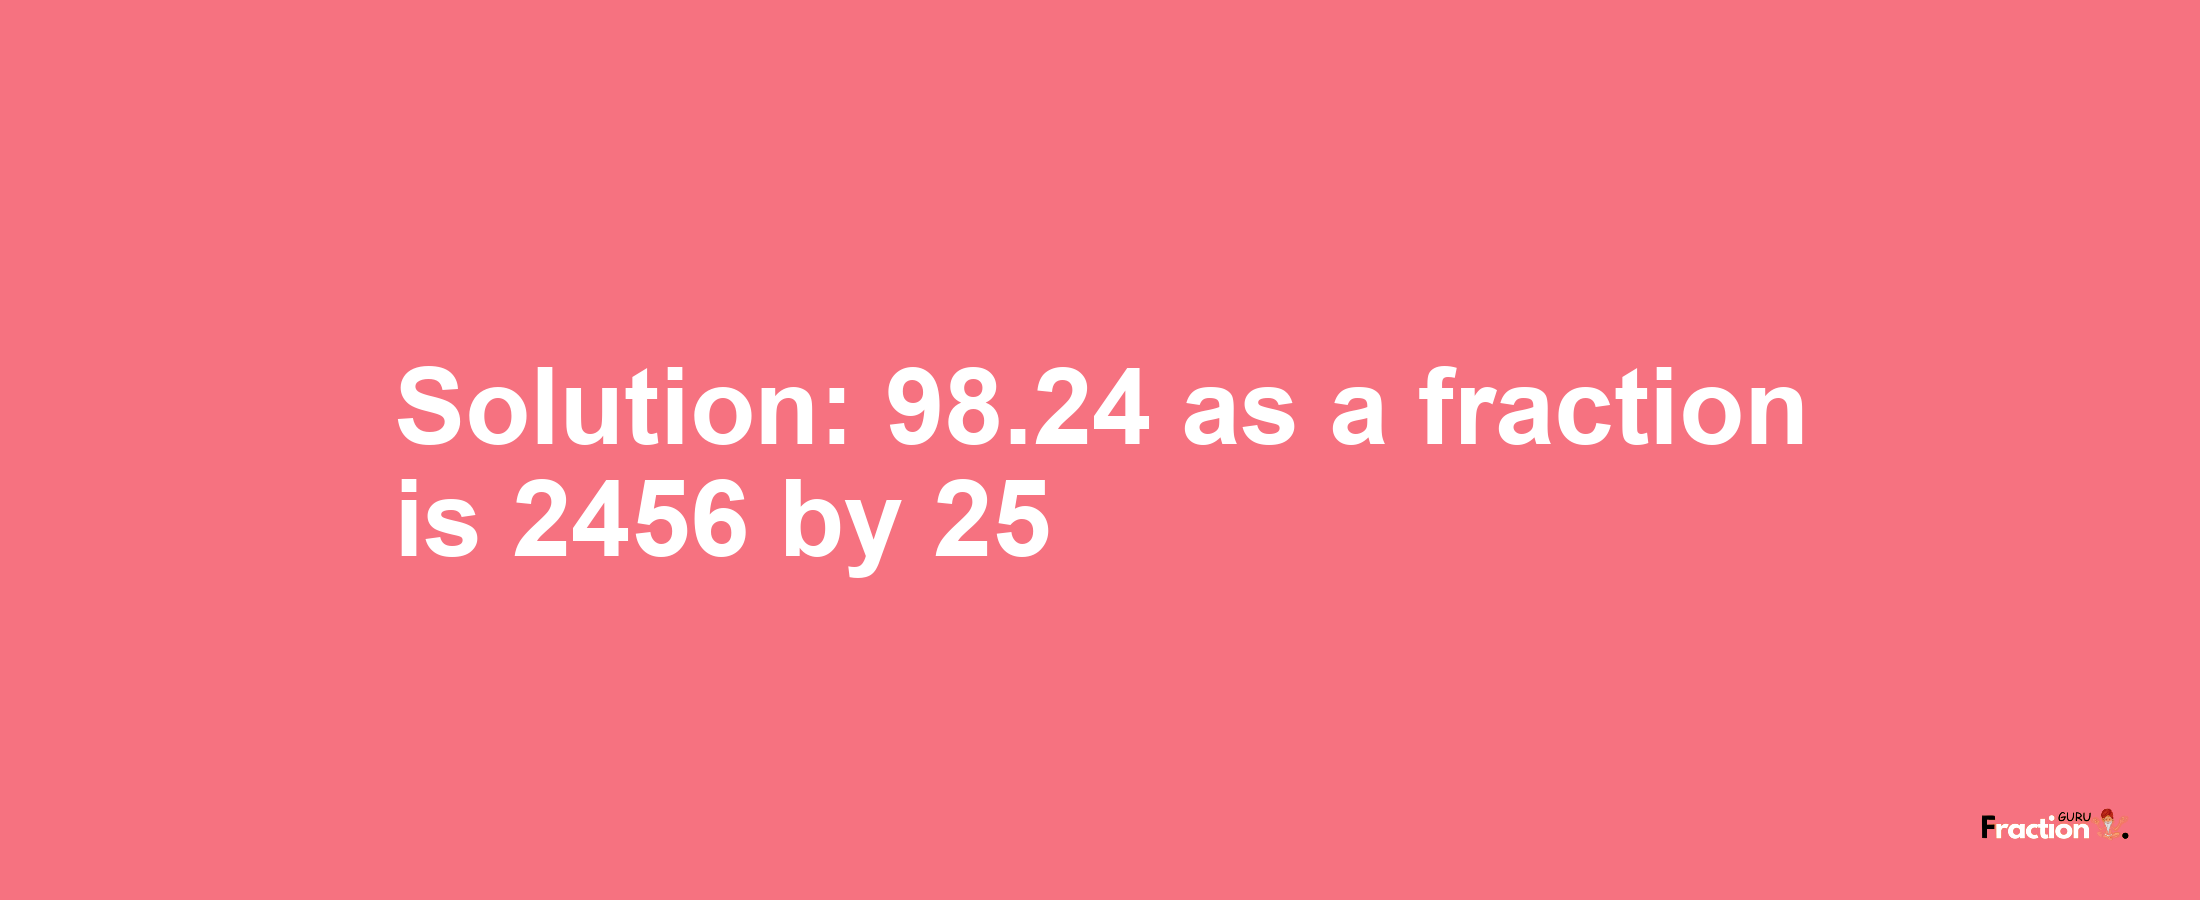 Solution:98.24 as a fraction is 2456/25